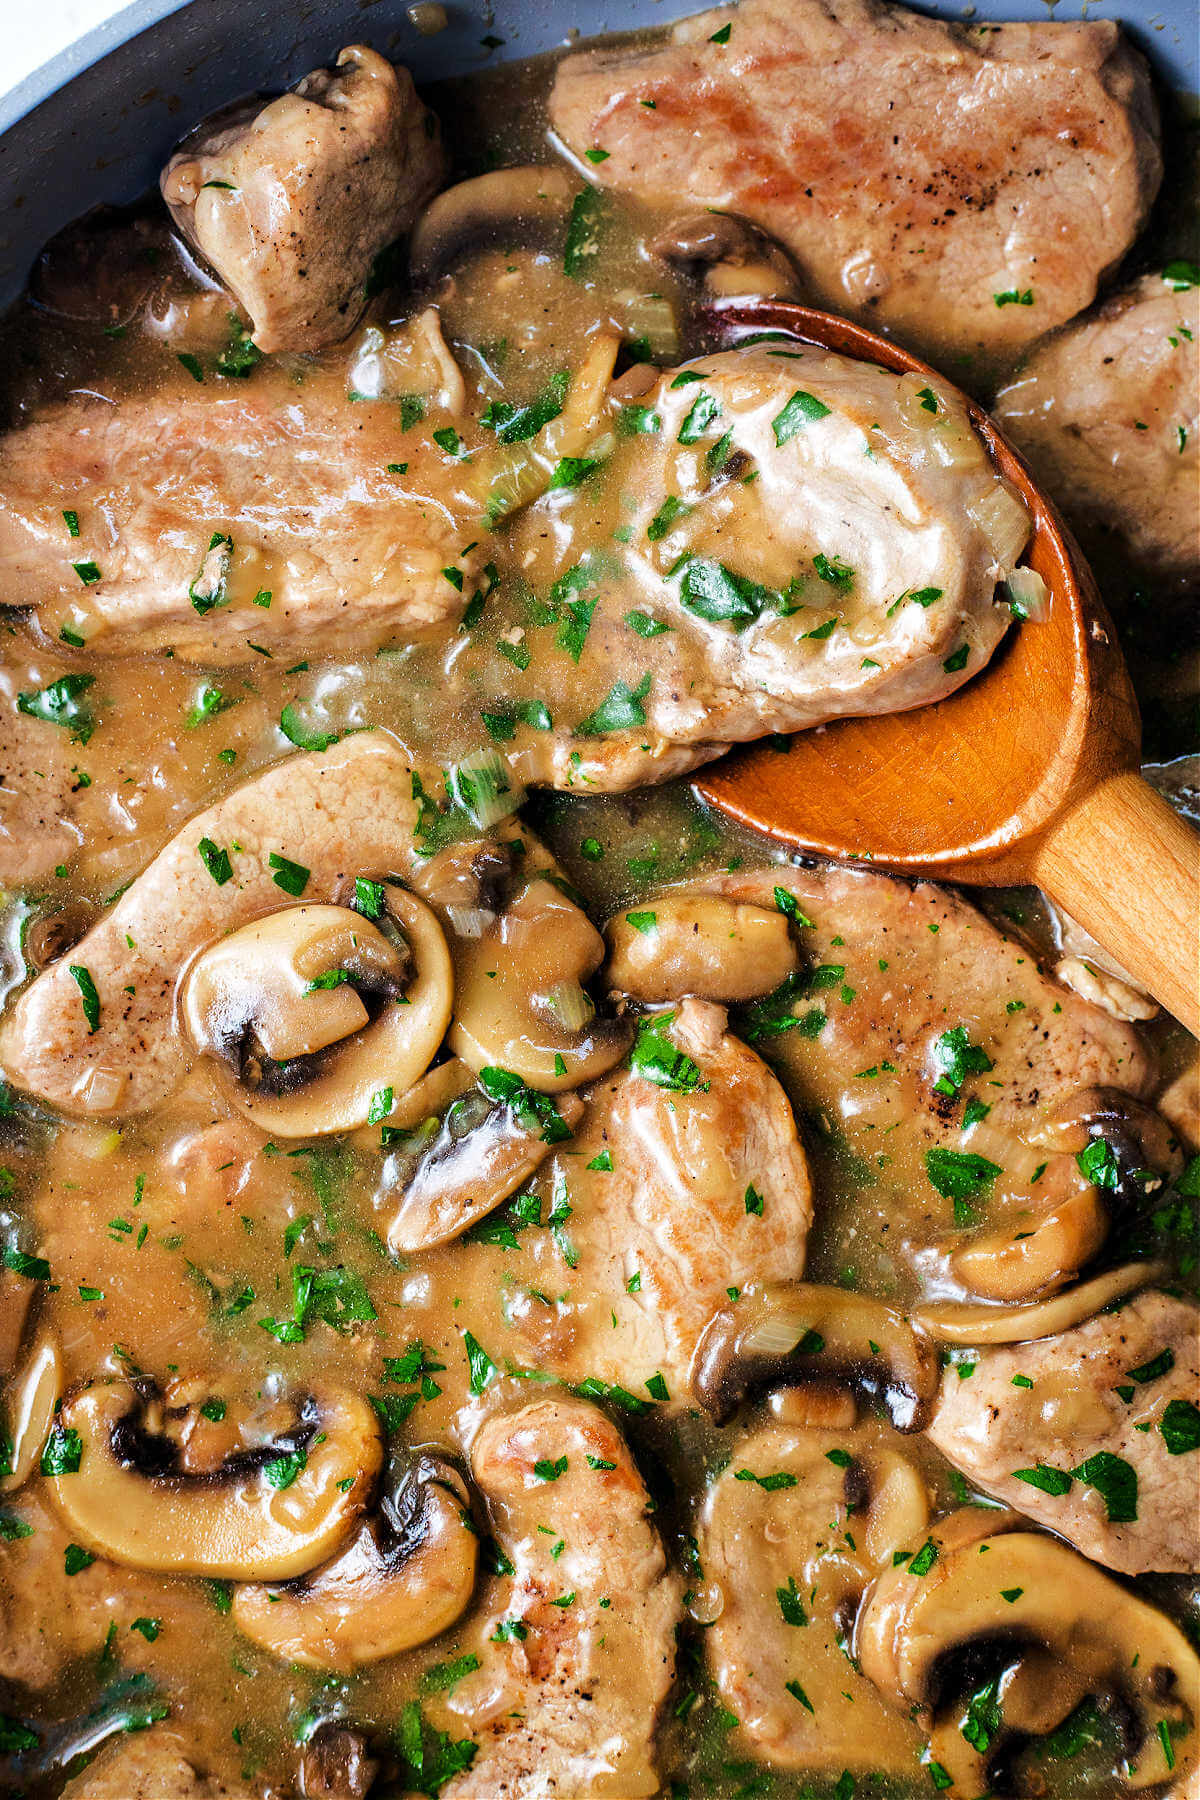 simmering pork medallions with mushroom gravy in a skillet with a wooden spoon.